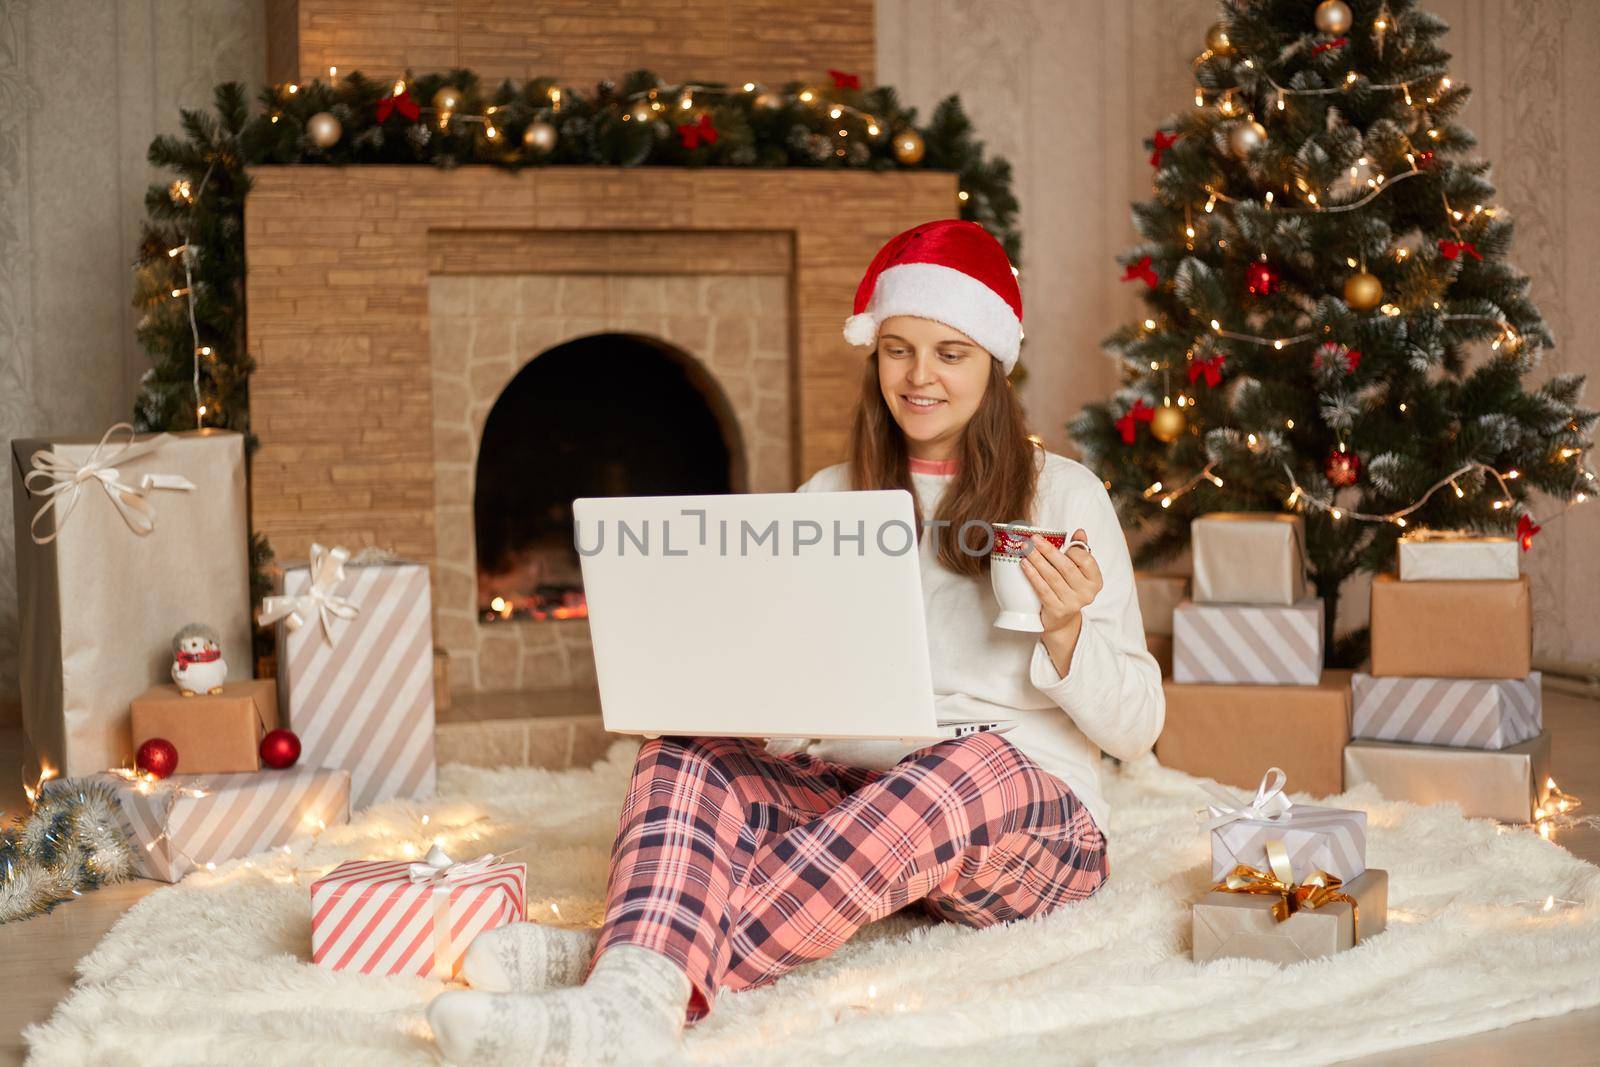 Merry Christmas and happy new year, smiling woman meeting together with somebody online via video calling on laptop, drinking coffee or tea while sitting on floor near fireplace.